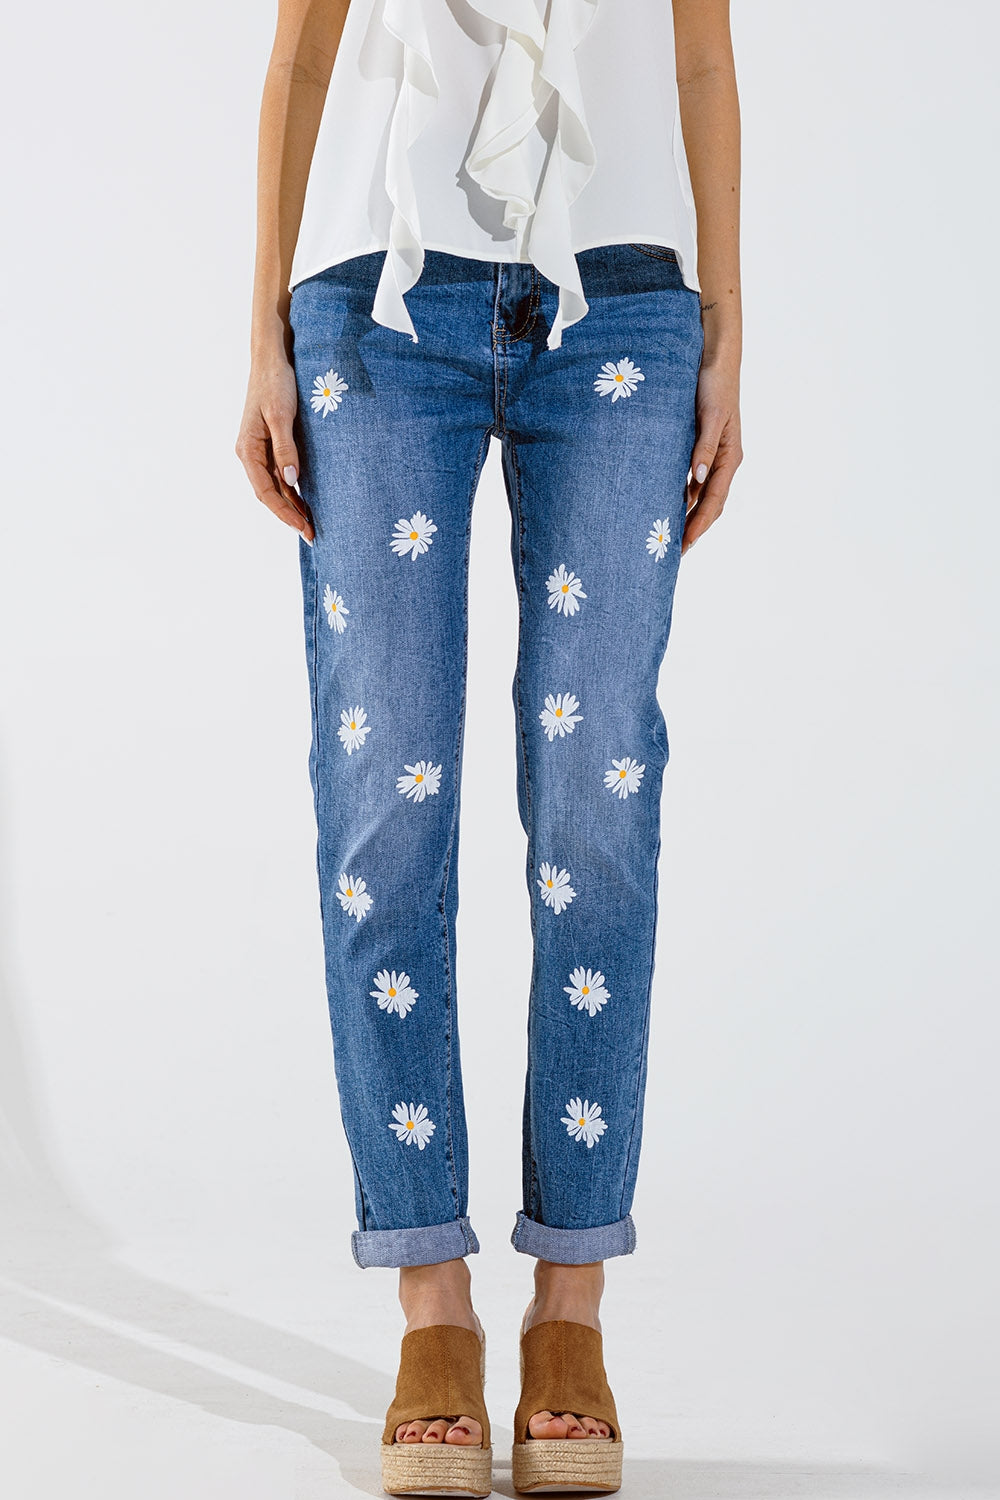 Q2 Skinny Jeans With Printed White Daisys In Mid Wash